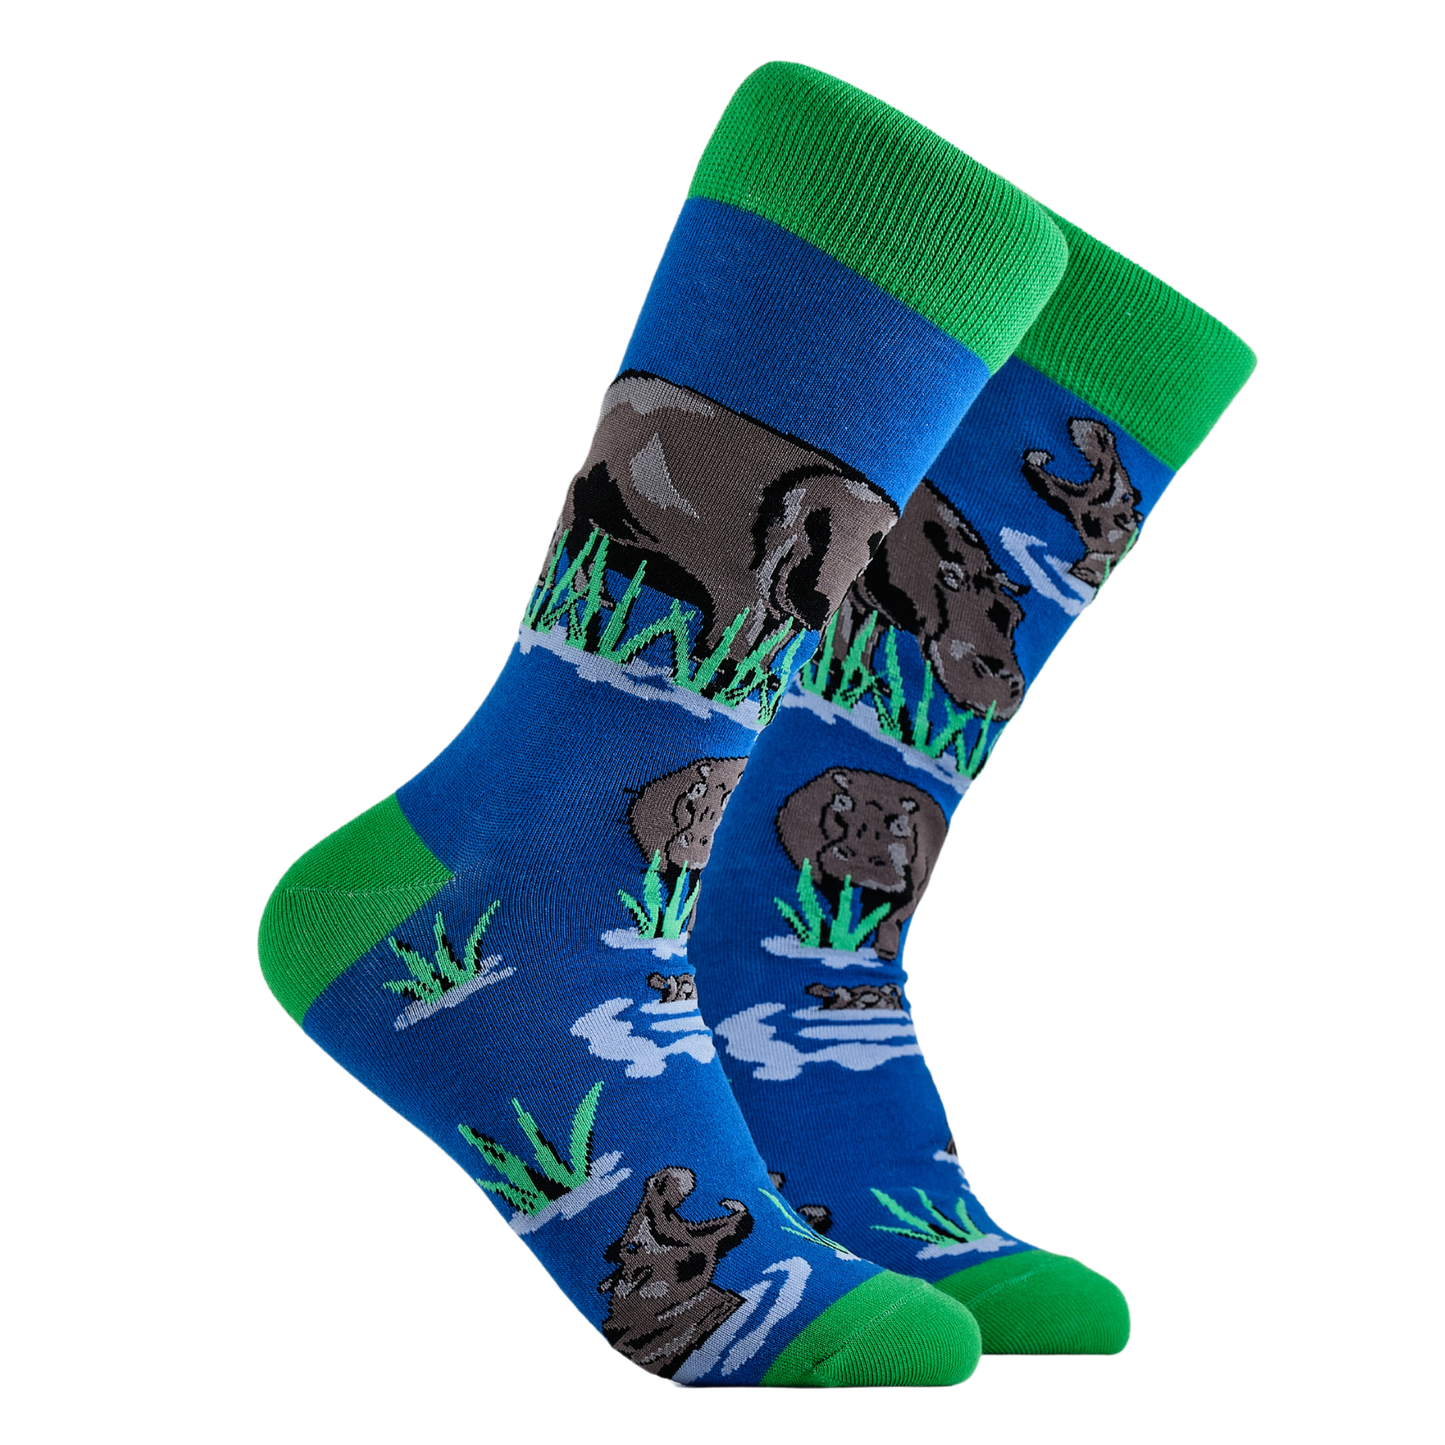 Hippo Socks - Hip-Hippo-Ray! A pair of socks depicting hippos in water. Blue legs, green cuff, heel and toe.